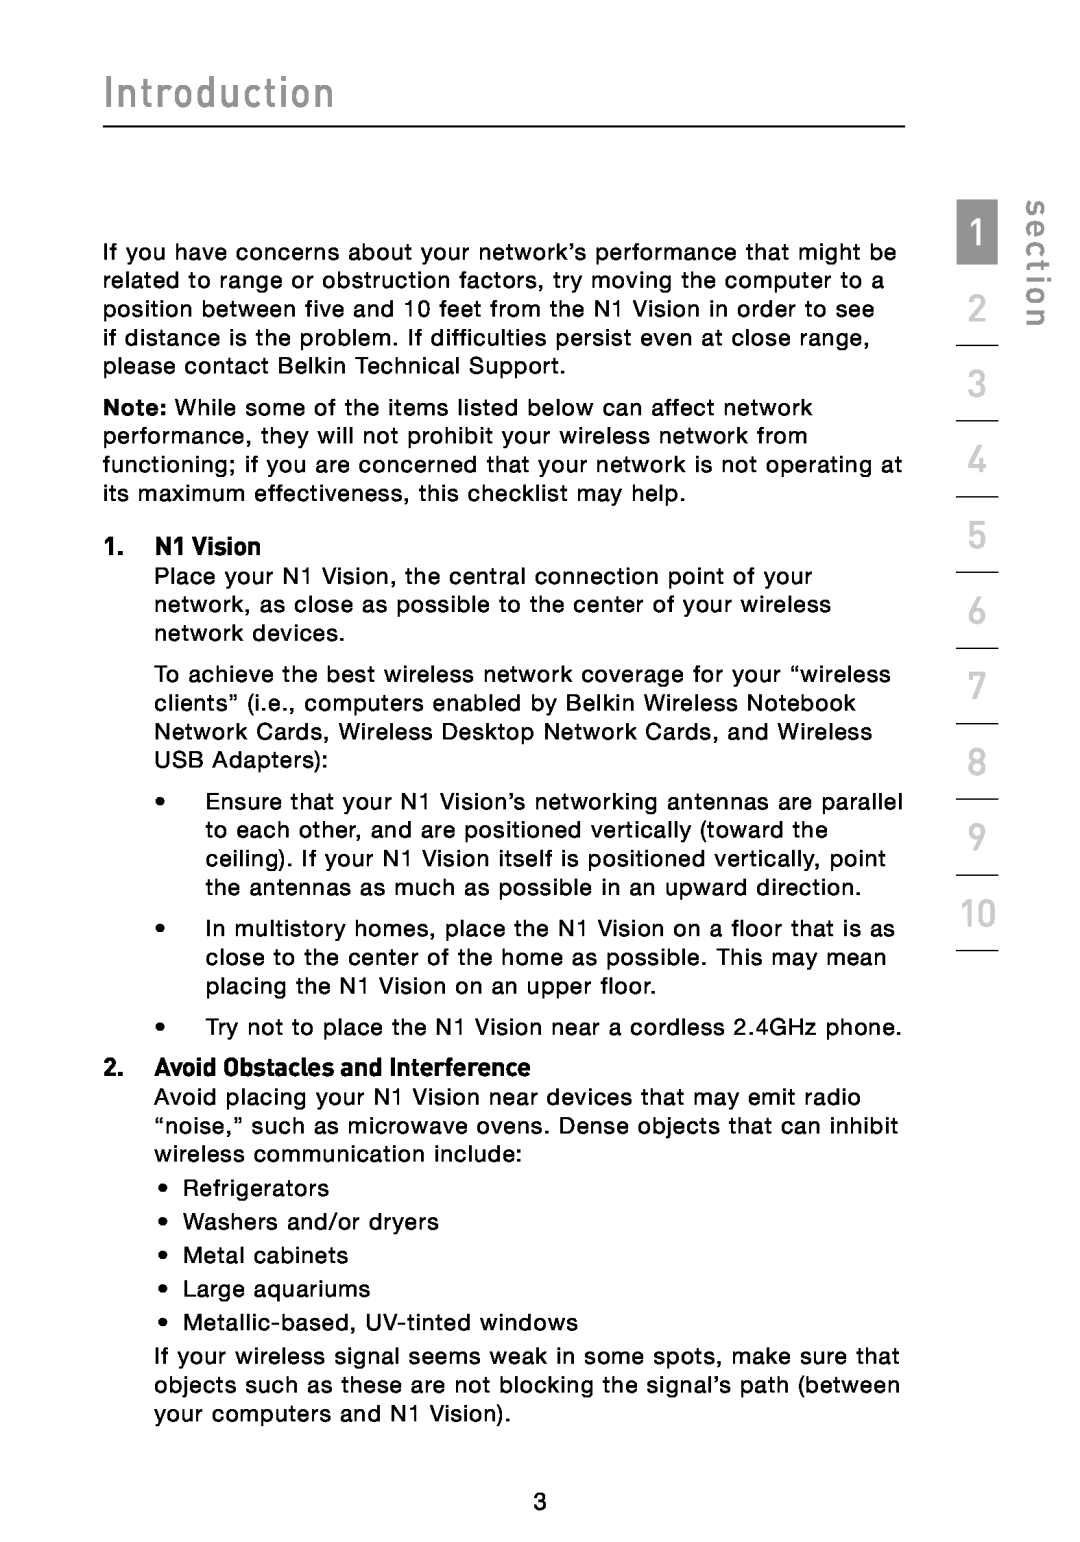 Belkin user manual section, 1. N1 Vision, Avoid Obstacles and Interference, Introduction 